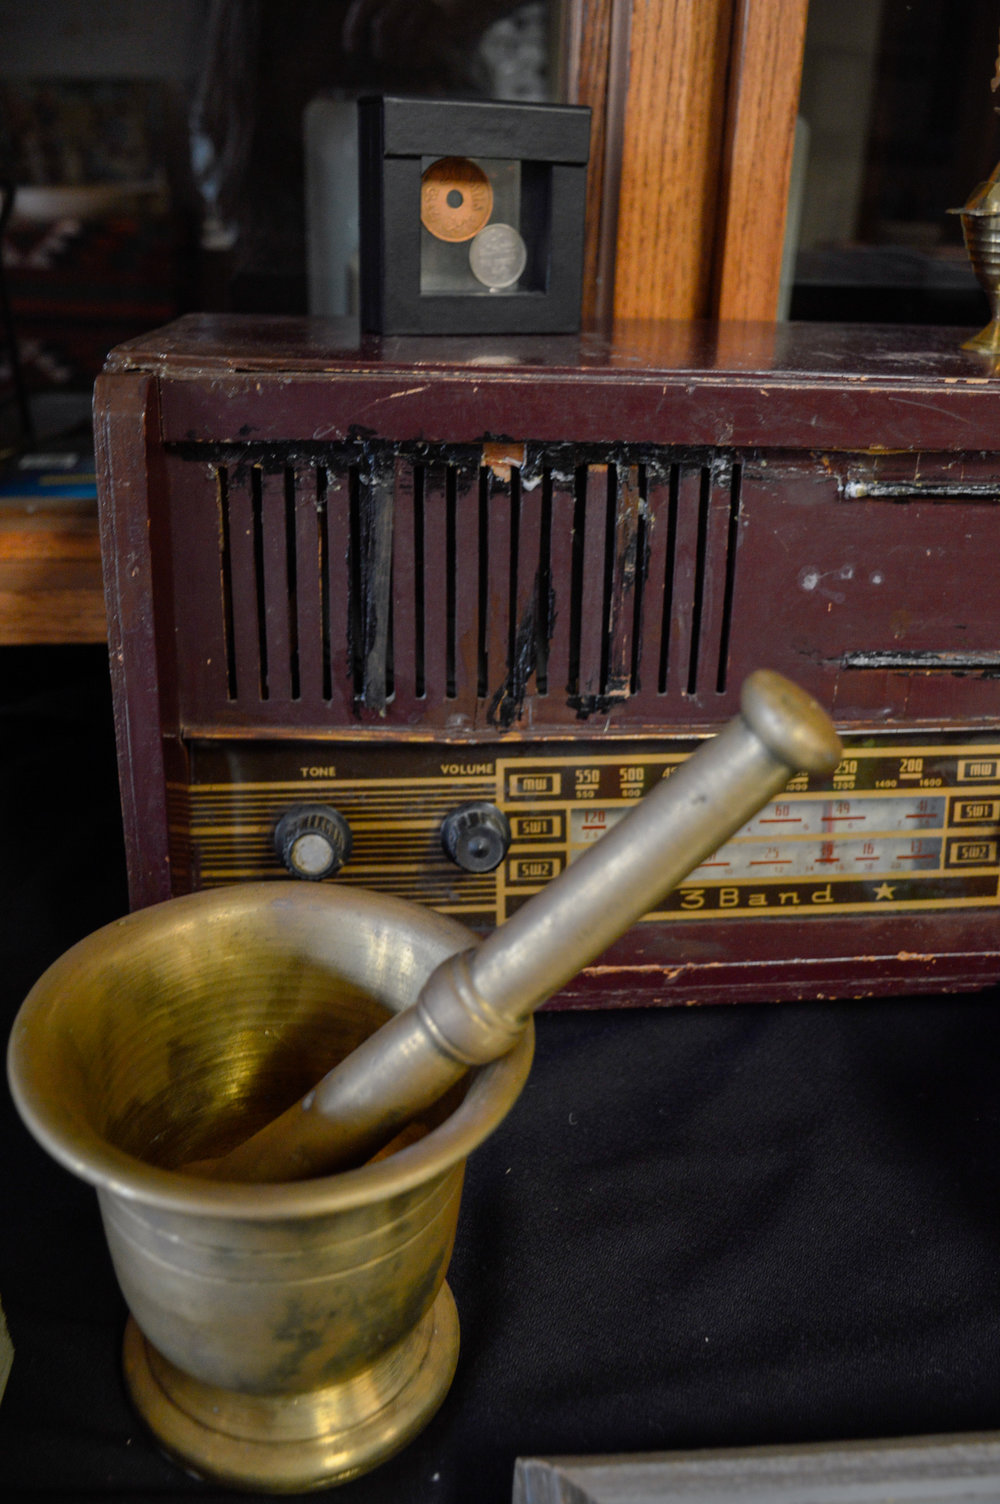  Old radio and artifacts found at Broken Film Festival 